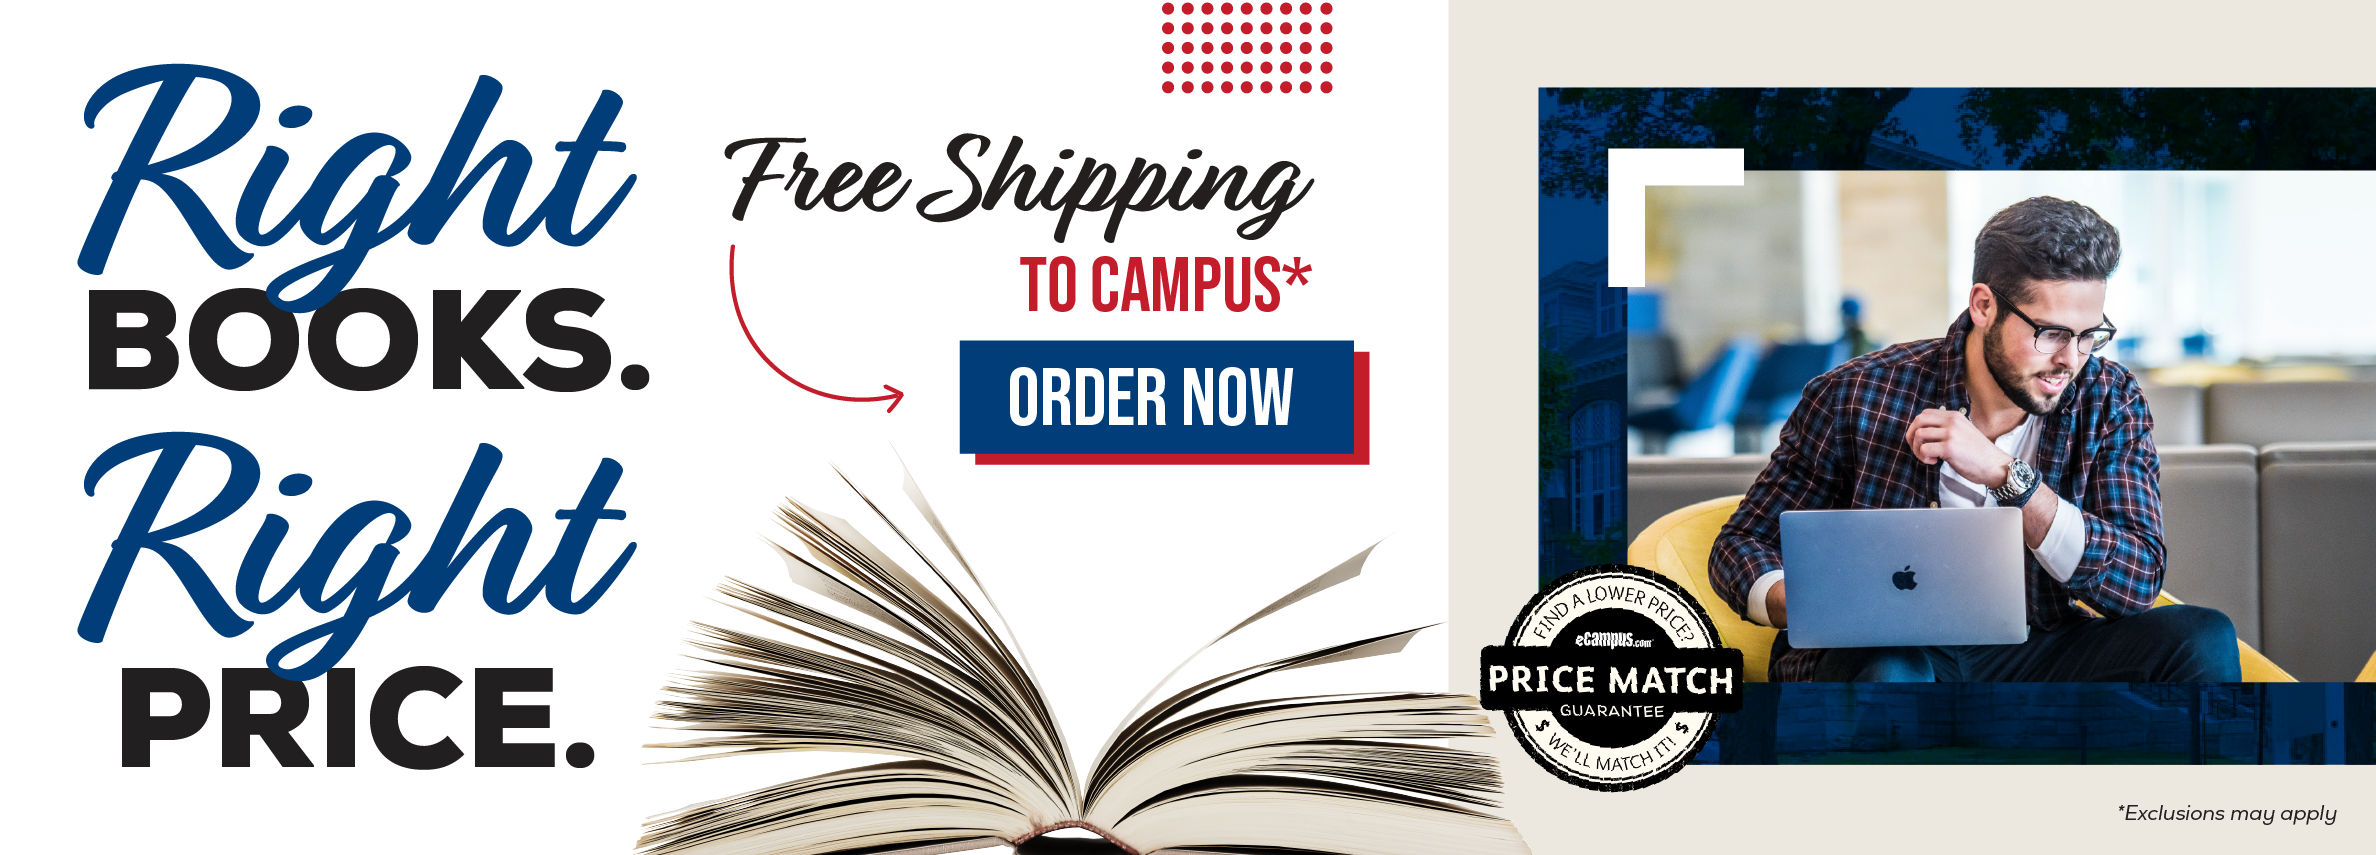 Right books. Right price. Free shipping to campus.* Order now. Price Match Guarantee. *Exclusions may apply.